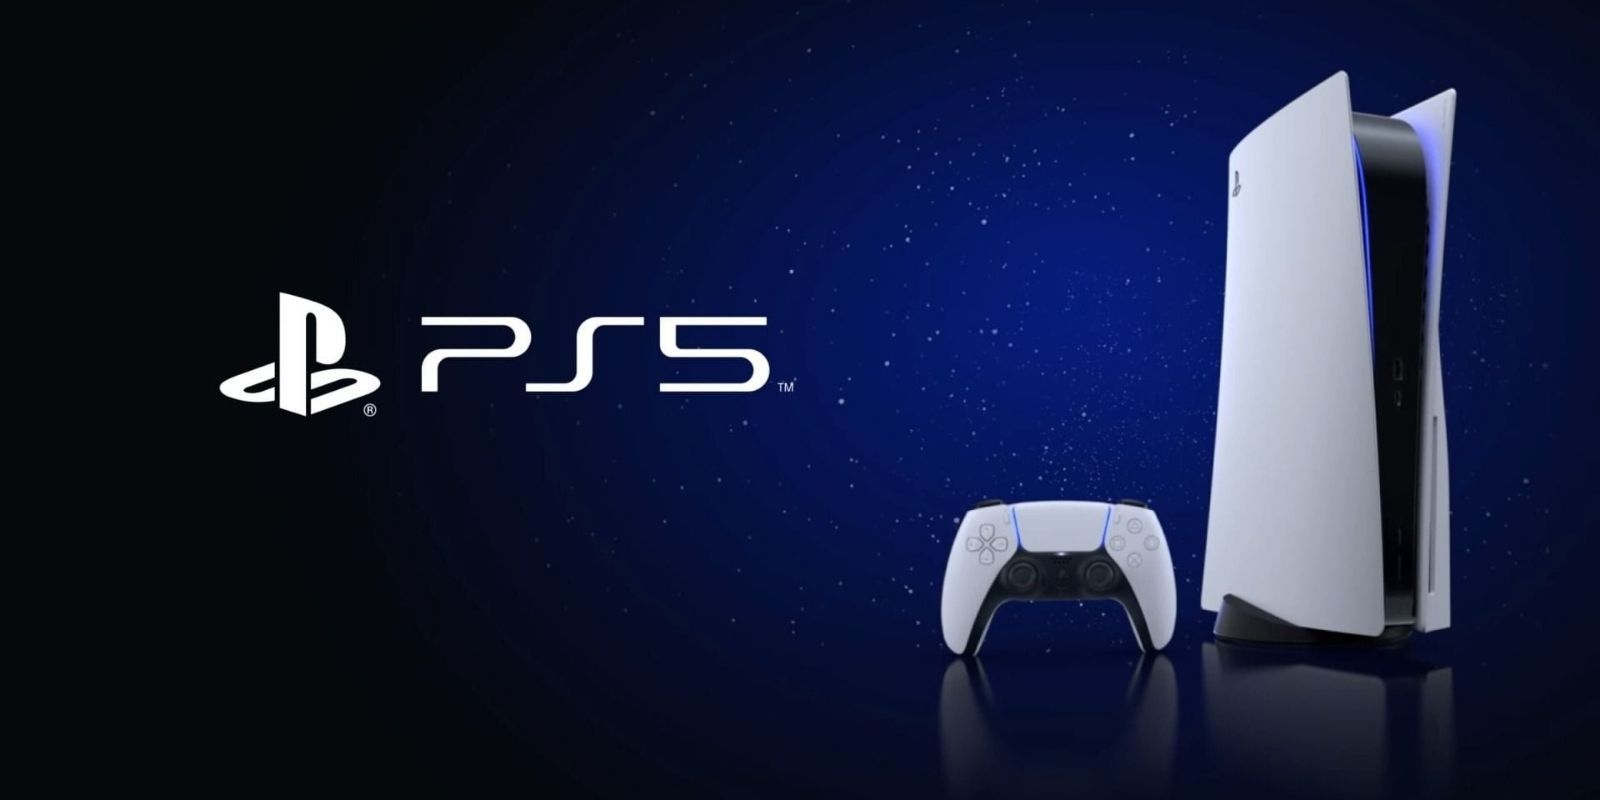 The PlayStation 5 and DualSense controller on a black and blue background